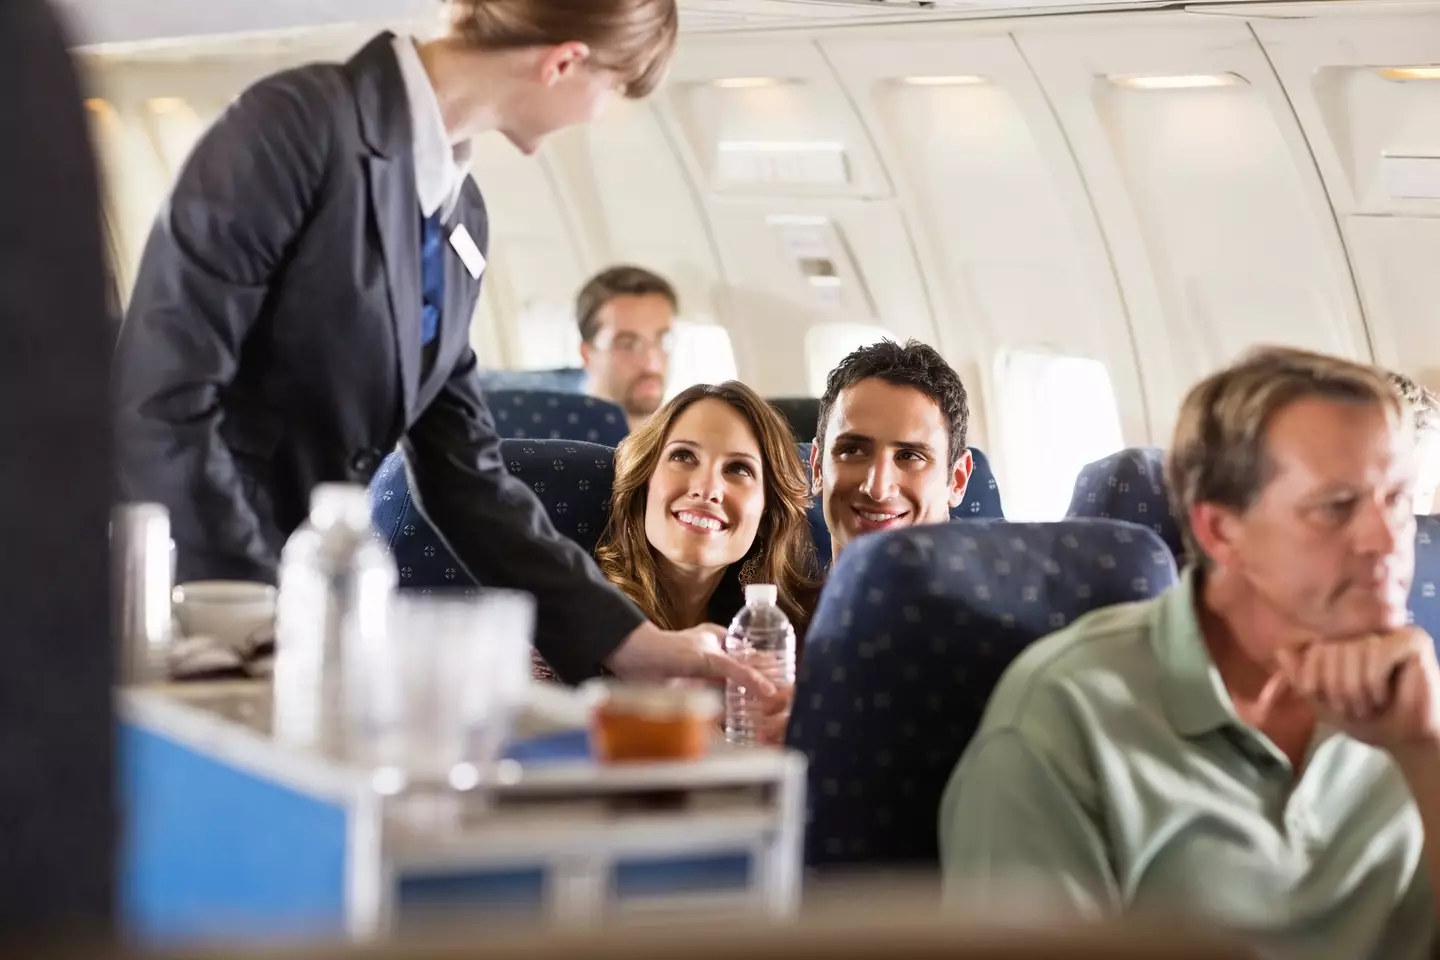 A flight attendant has revealed their top three safety tips.